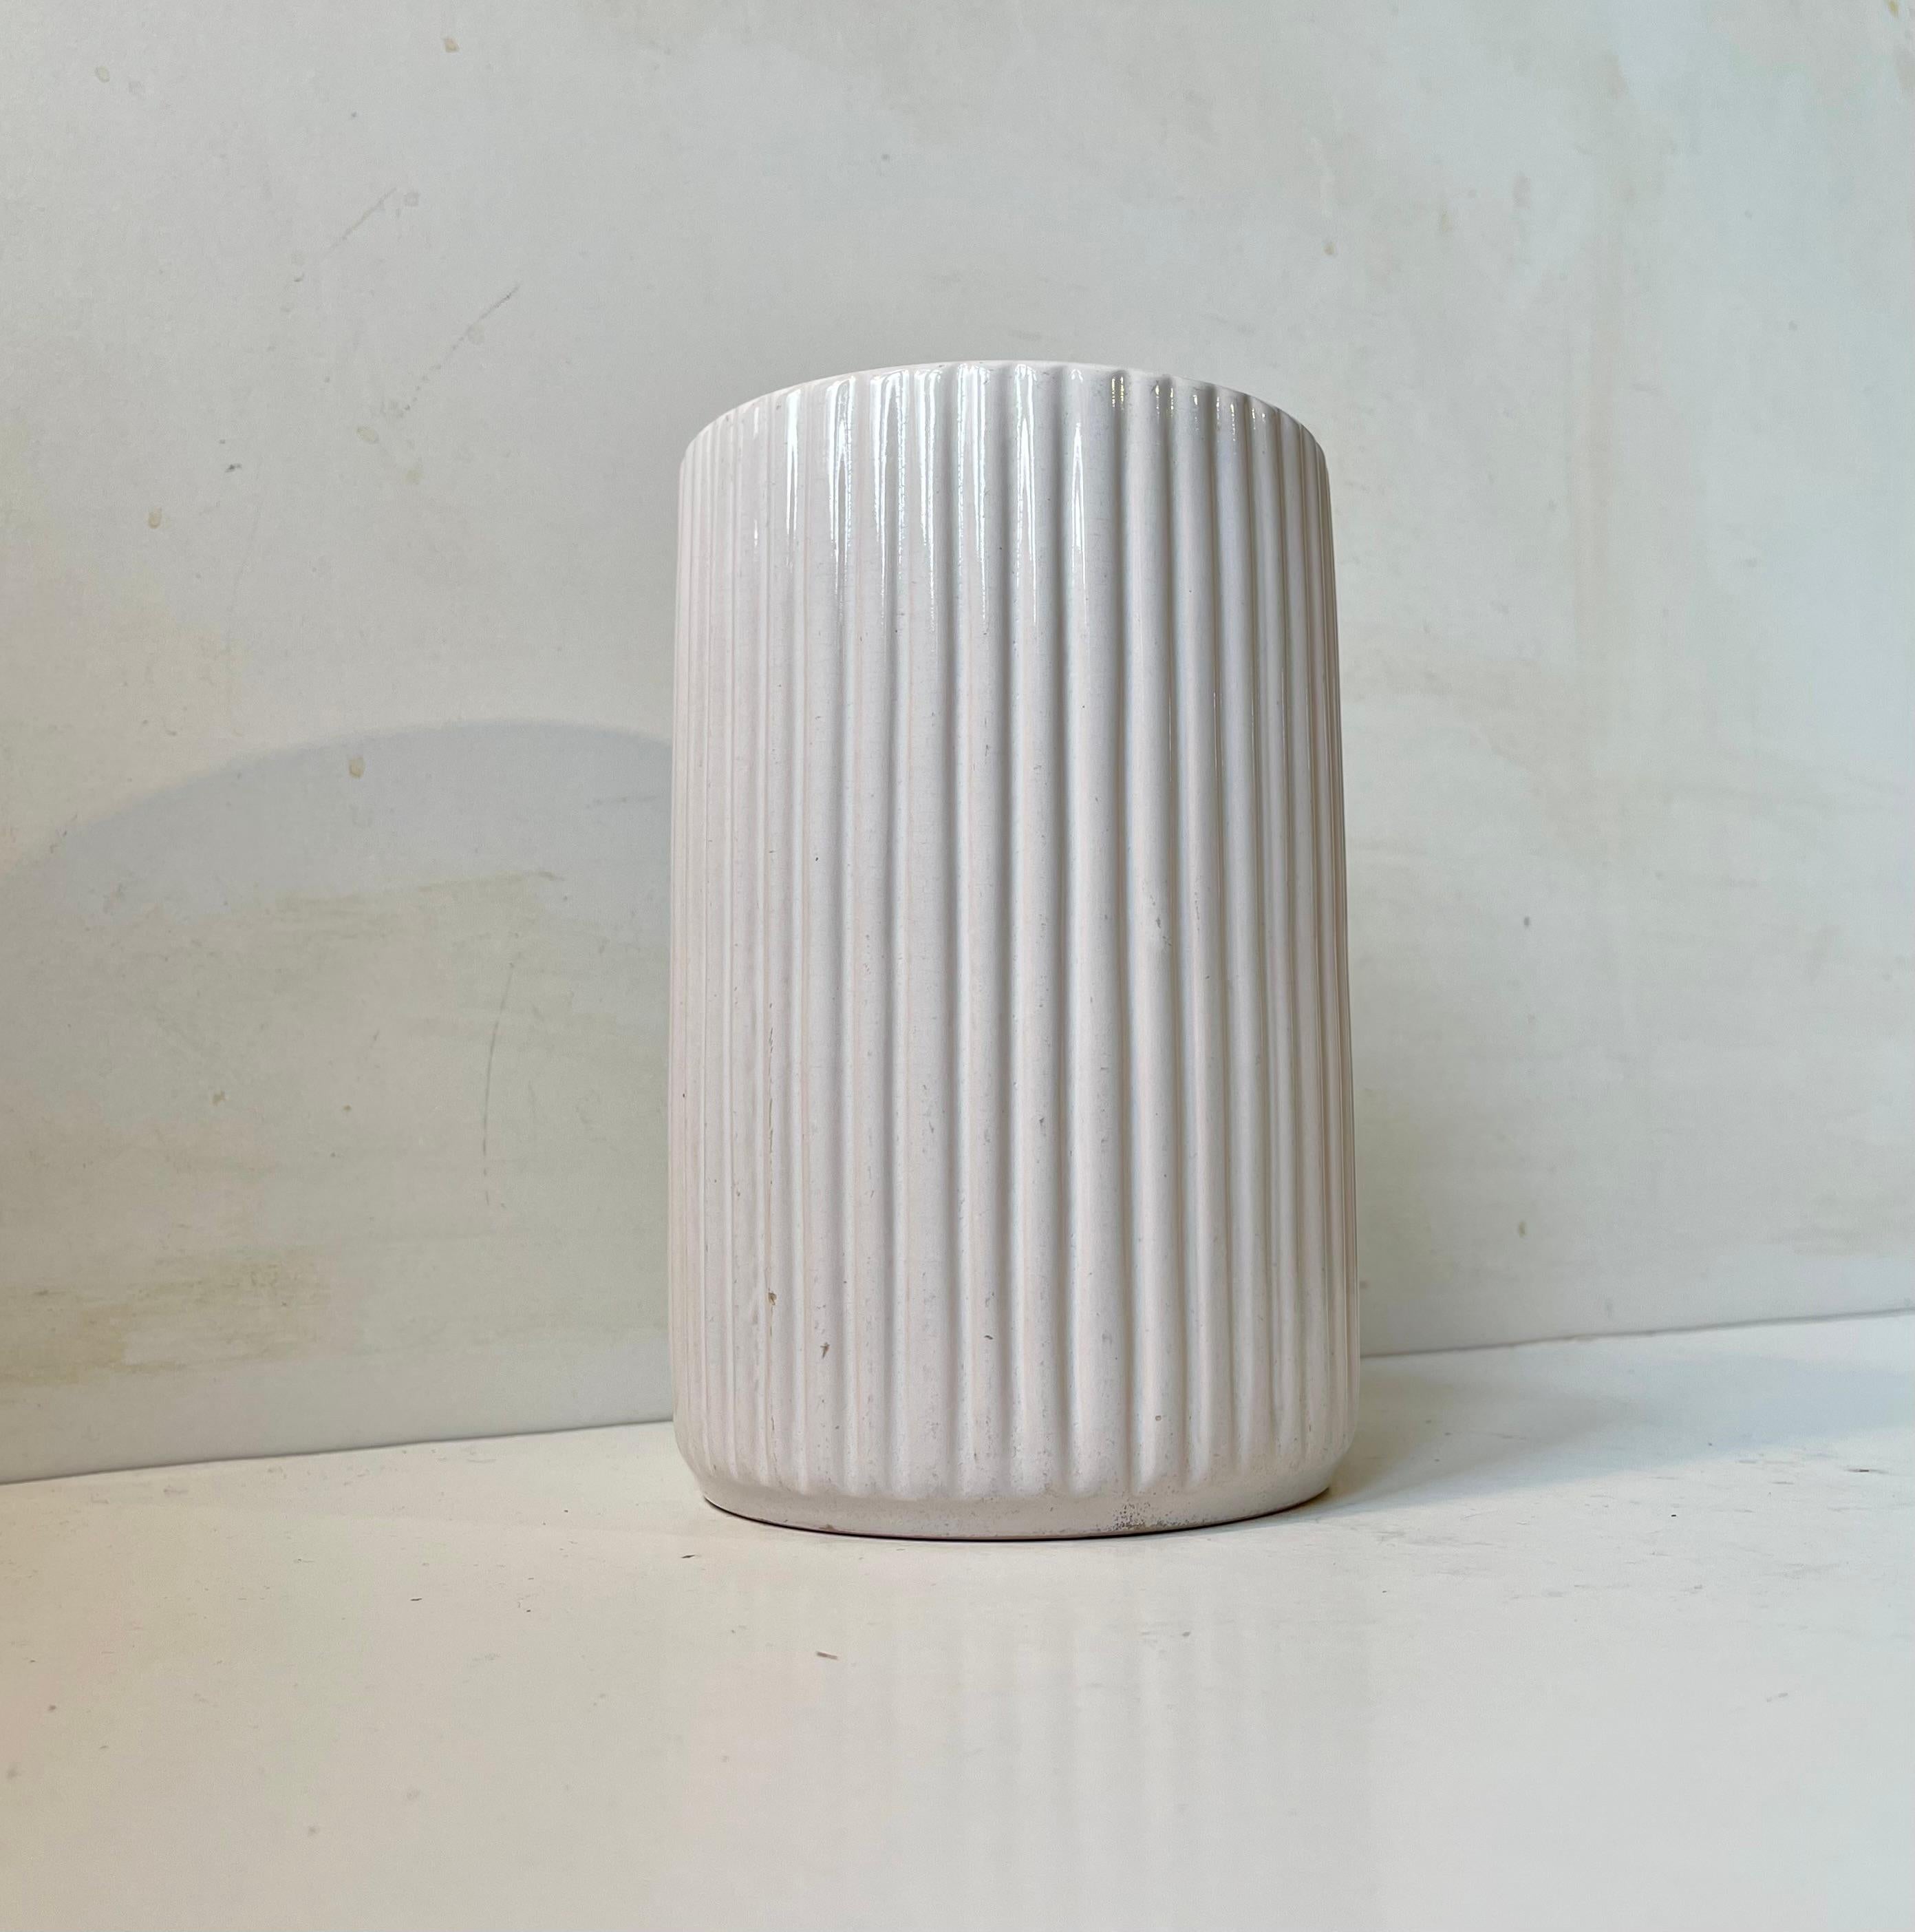 Fluted Architectural Ceramic Vase in White Glaze by L. Hjorth, 1940s For Sale 1